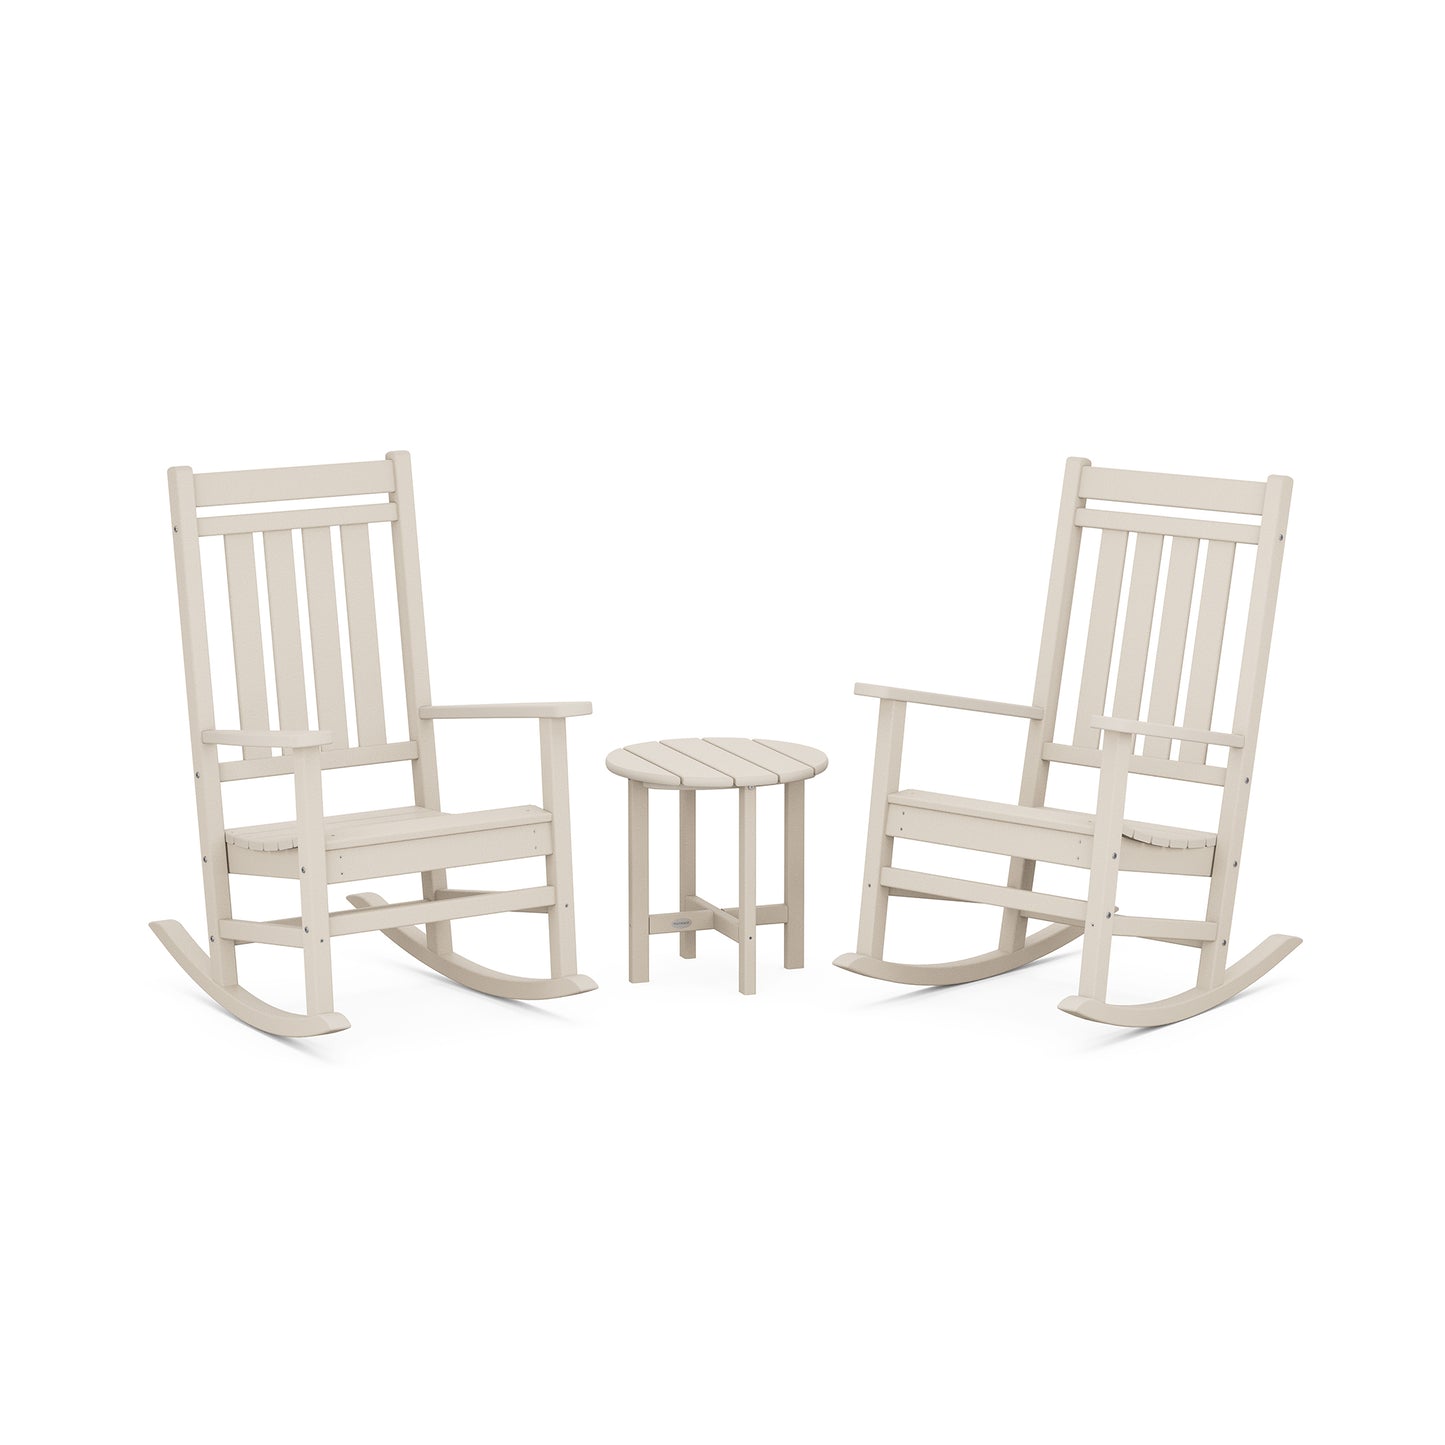 Two white POLYWOOD® Estate 3-Piece Rocking Chair Sets facing each other with a small round table between them, all placed on a white background.